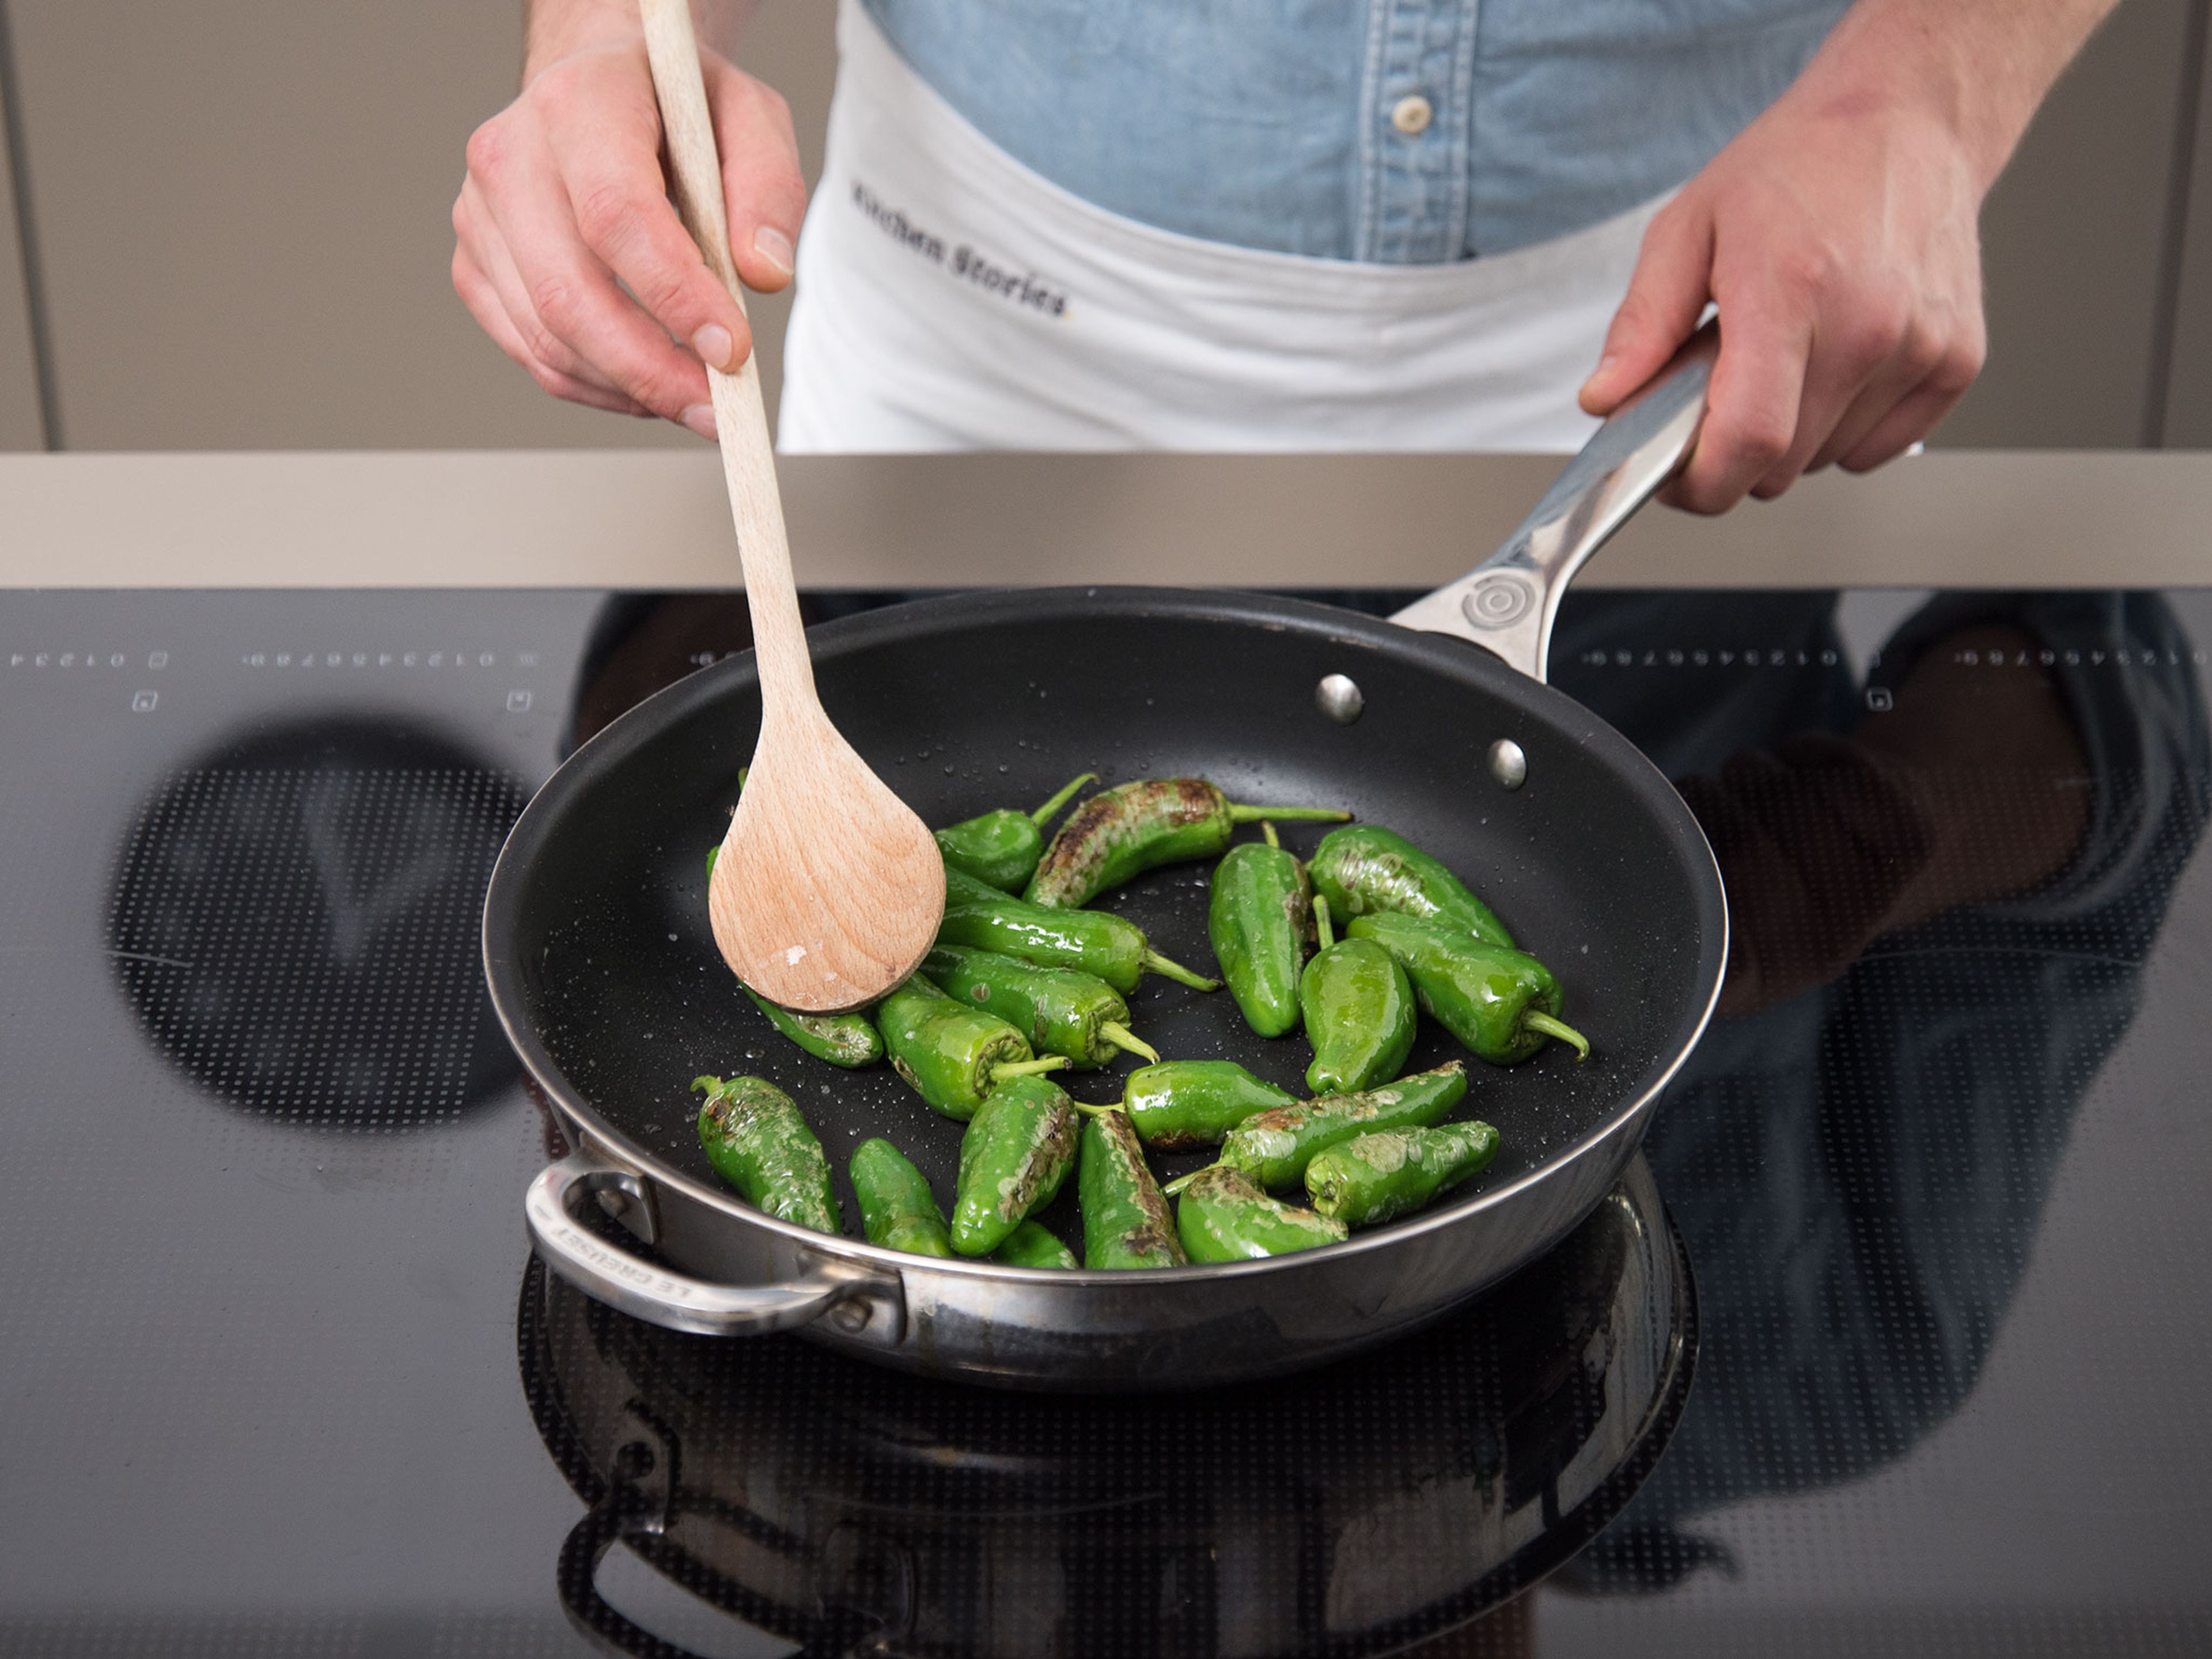 Add Padrón peppers to the same frying pan and fry for approx. 2 – 3 min. on medium-high heat until slightly charred.